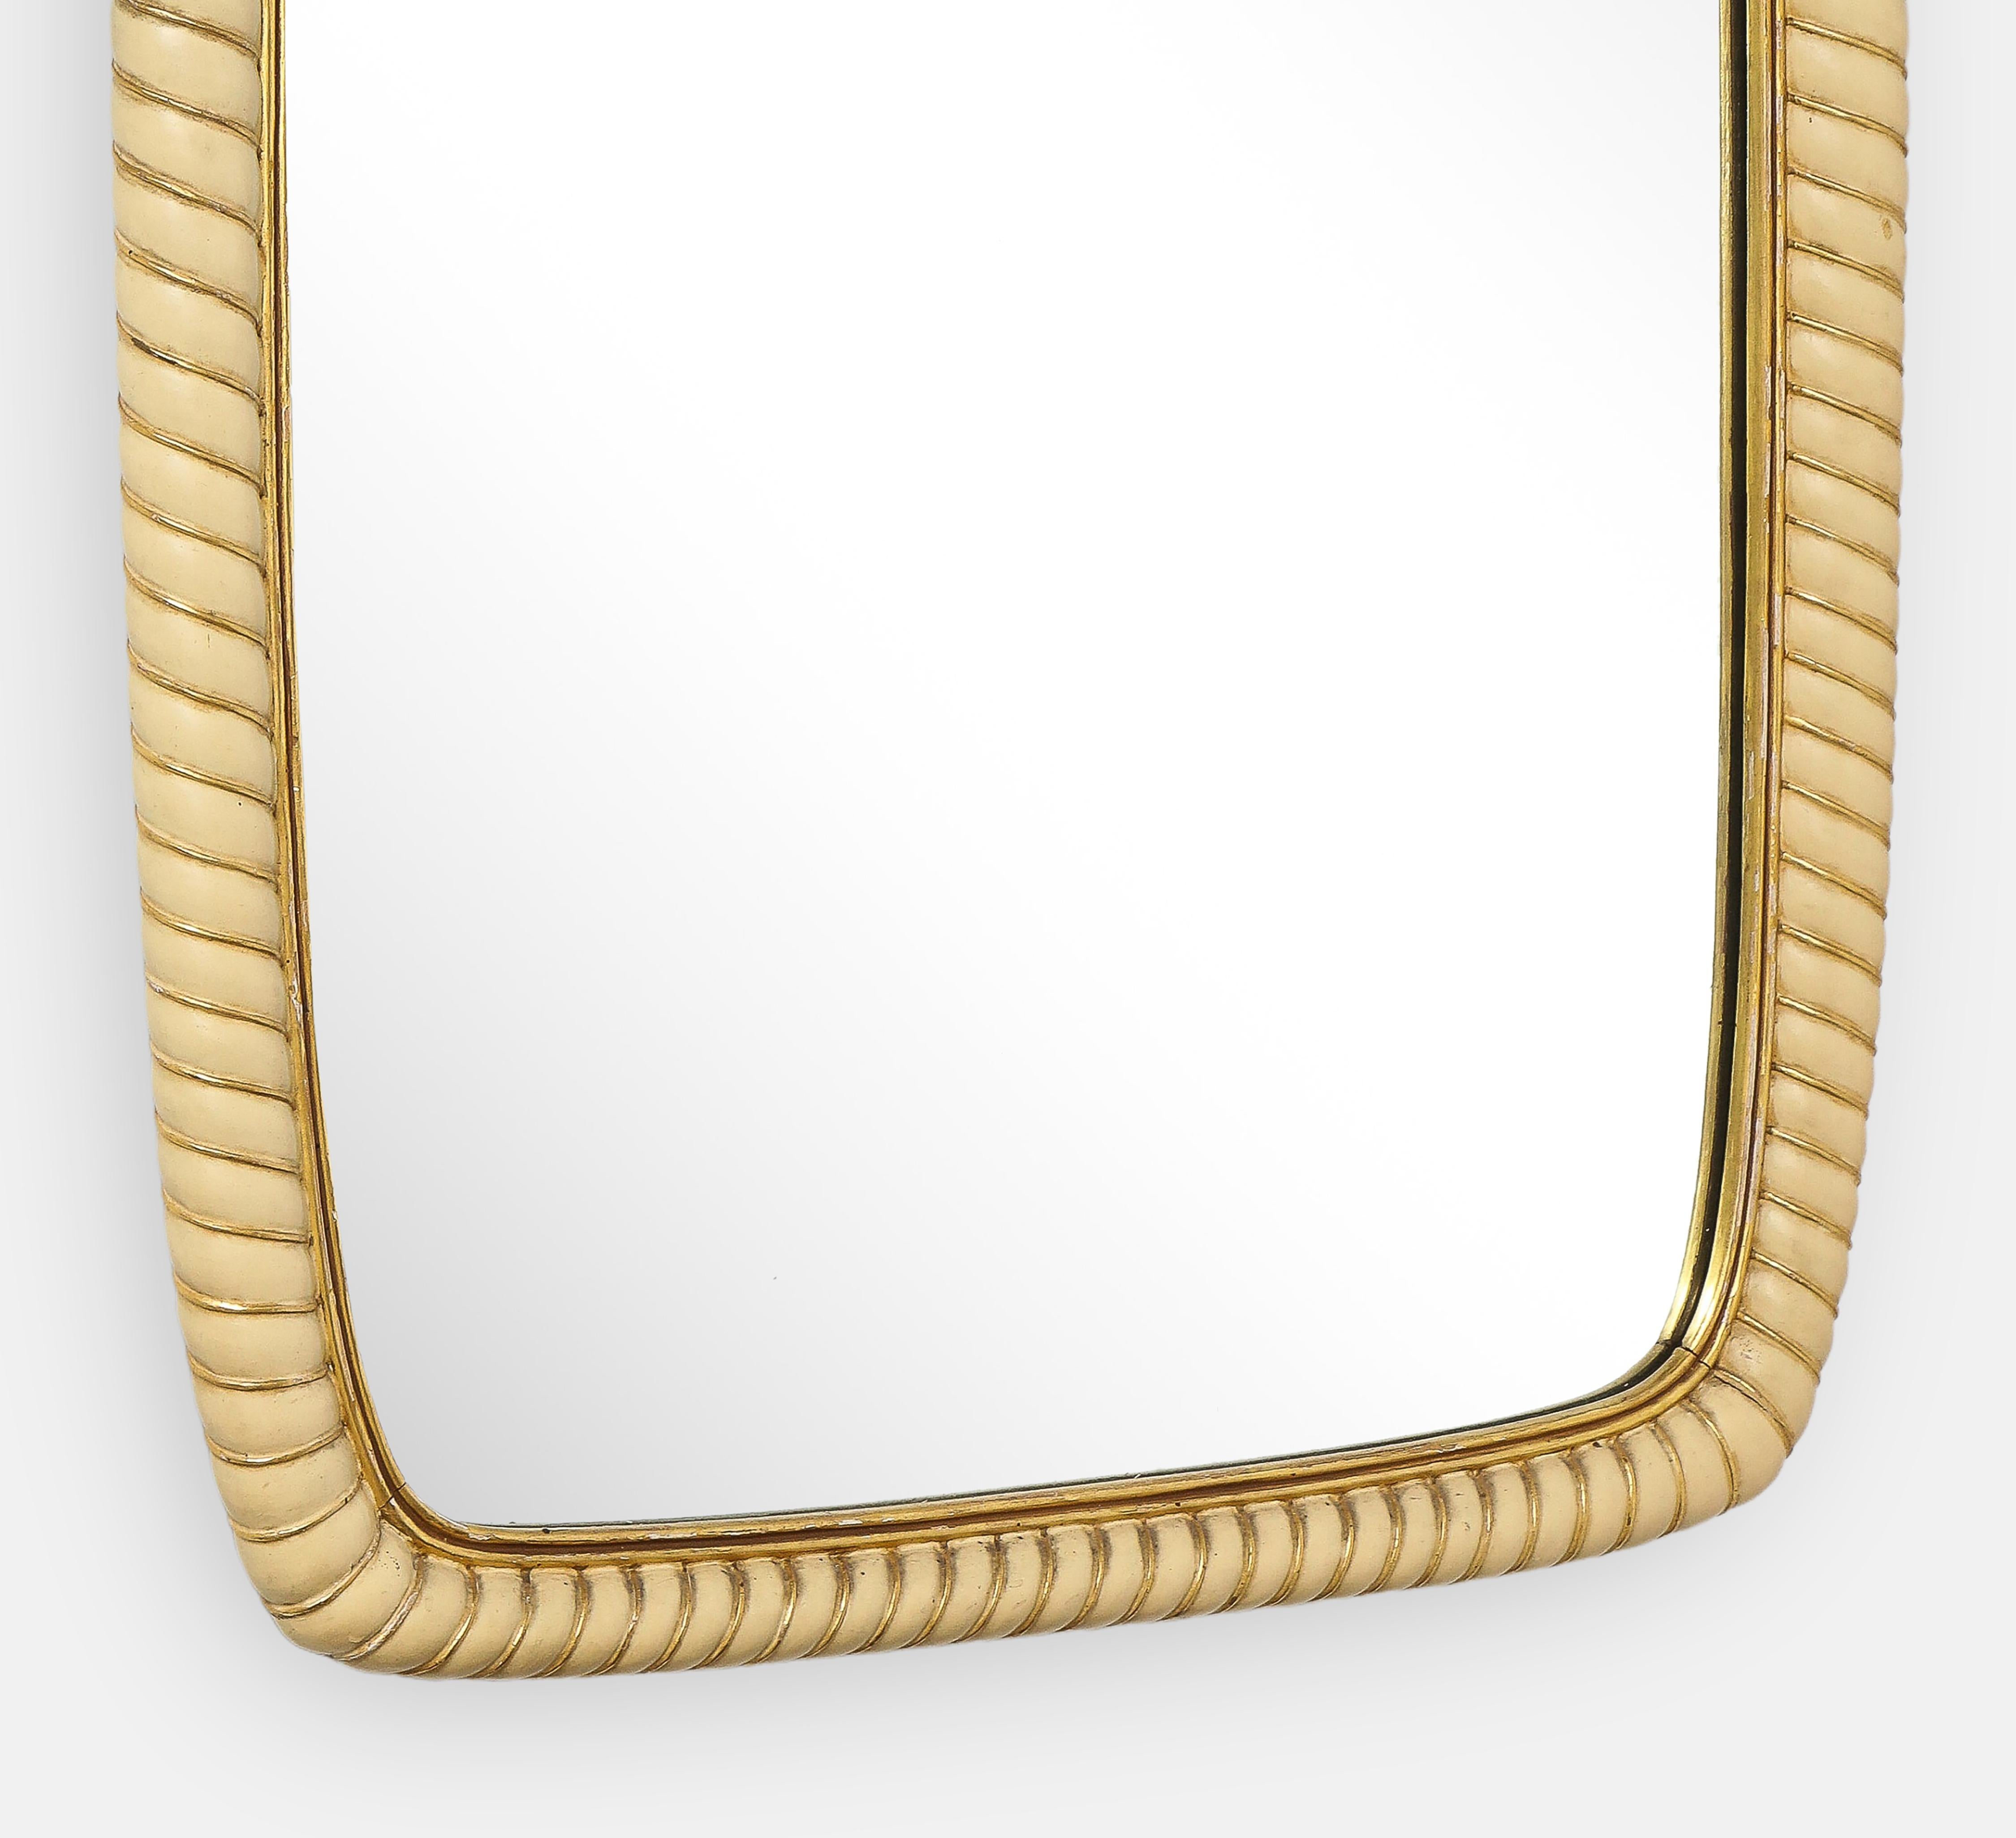 Osvaldo Borsani Rare Pair of Large Ivory Painted and Gilded Wood Mirrors, 1940s For Sale 1